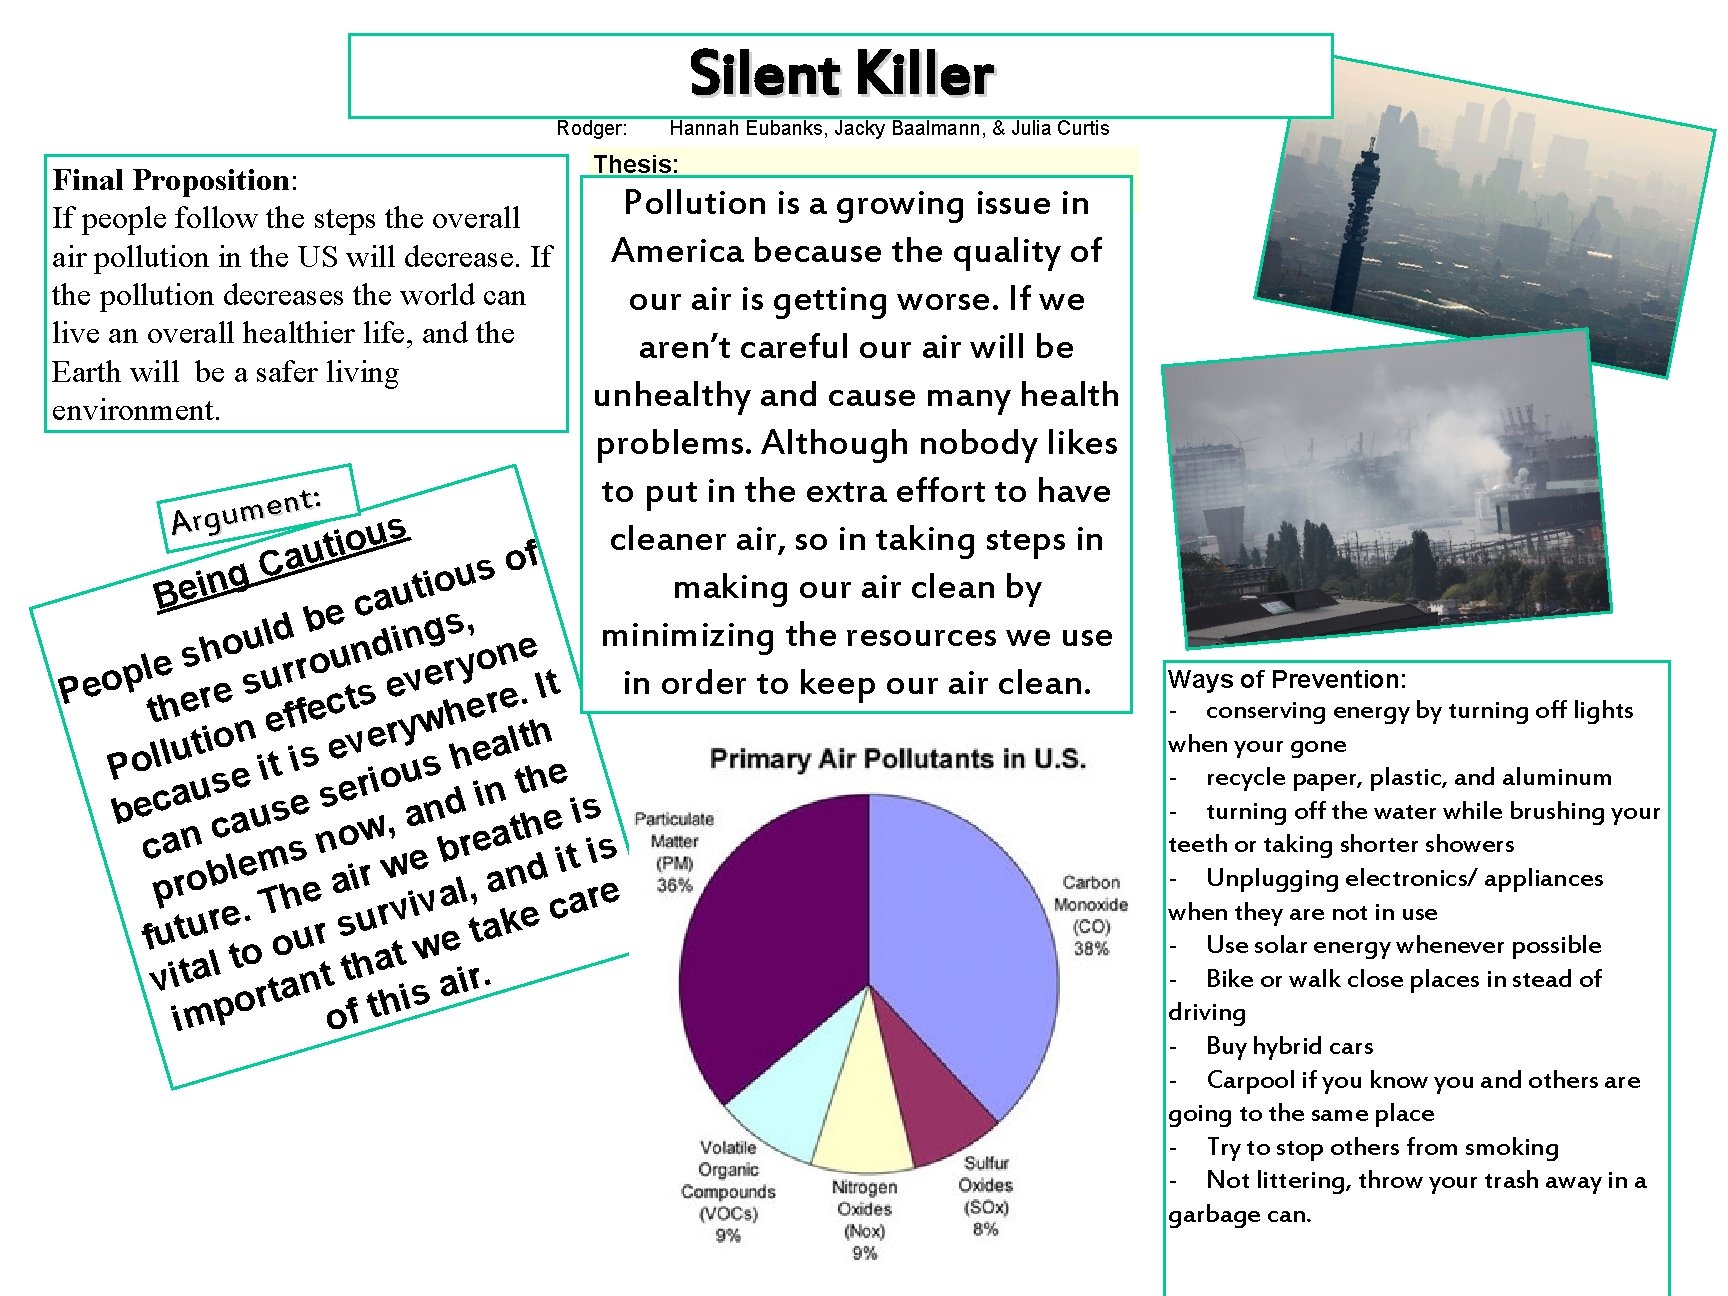 Silent Killer Rodger: Final Proposition: If people follow the steps the overall air pollution